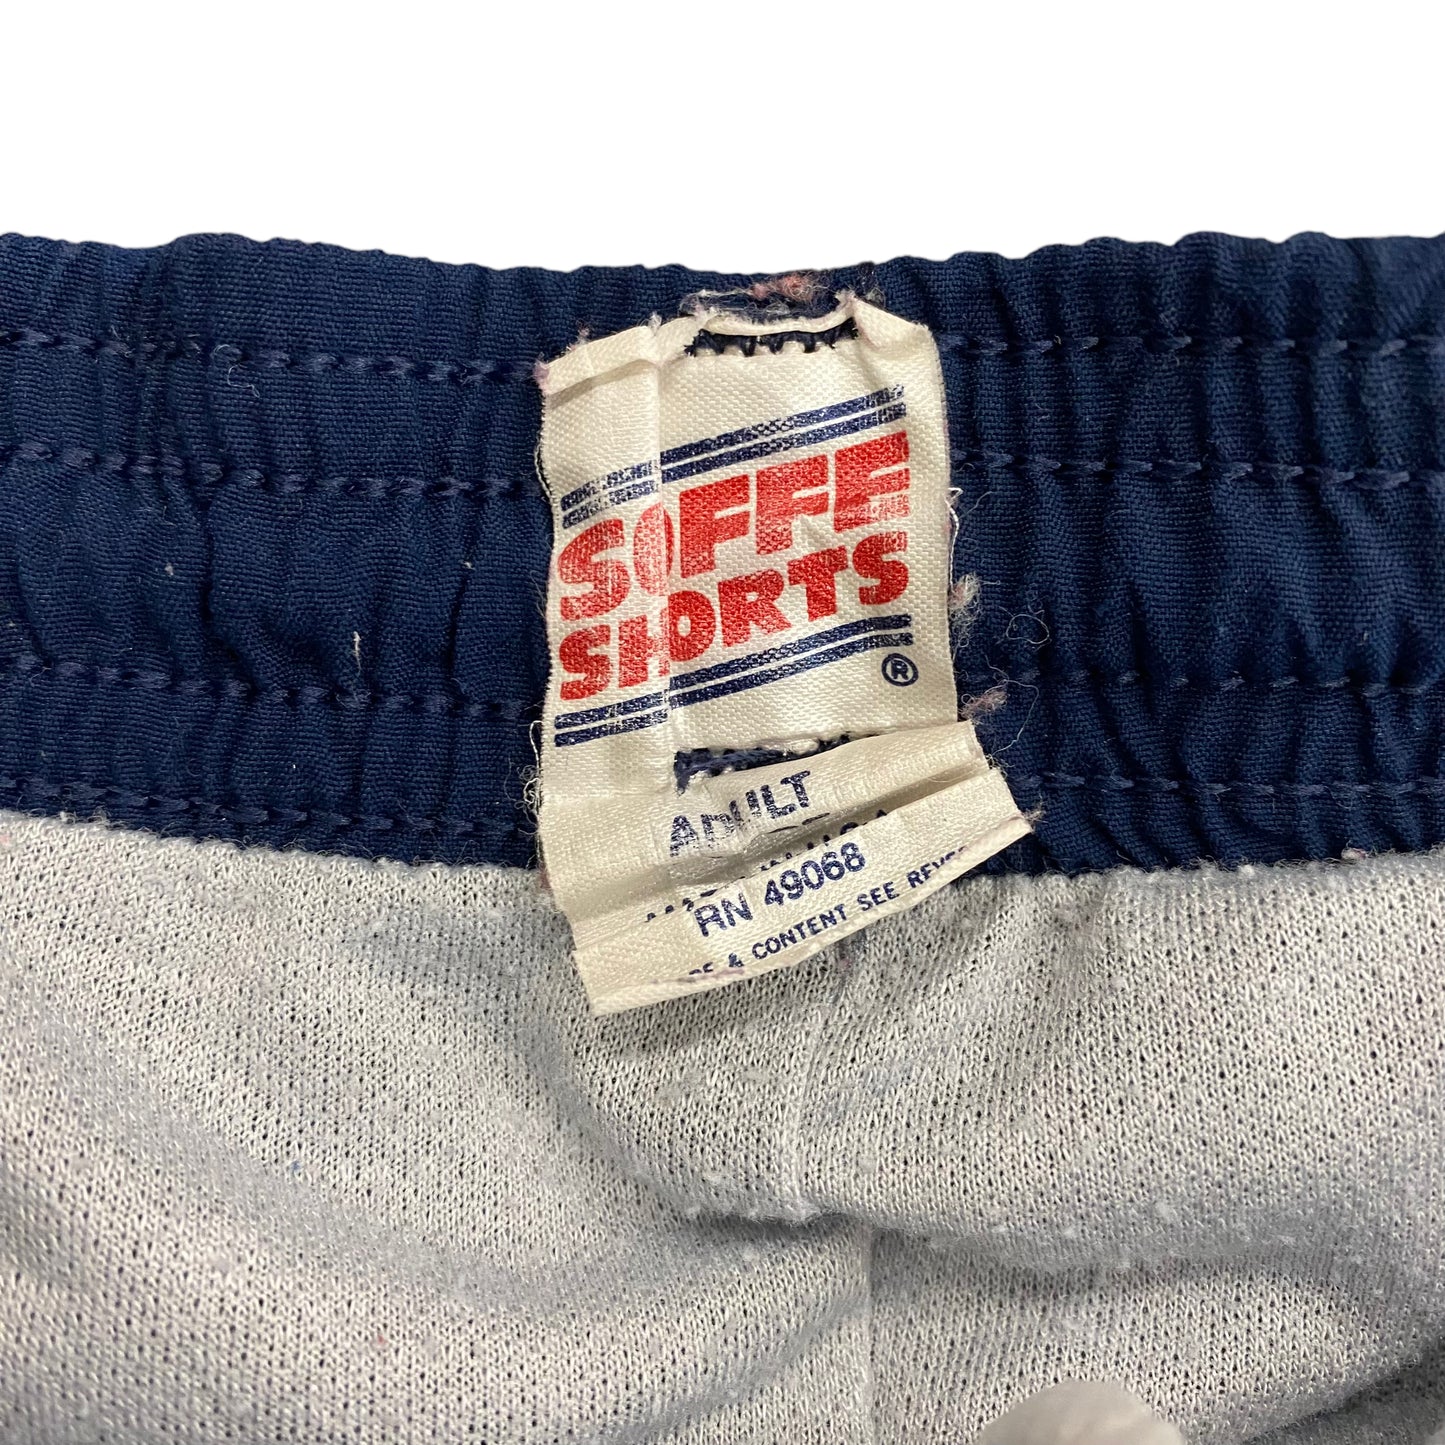 Vintage 1990s Soffe Navy Blue Lined Shorts - 5" Inseam